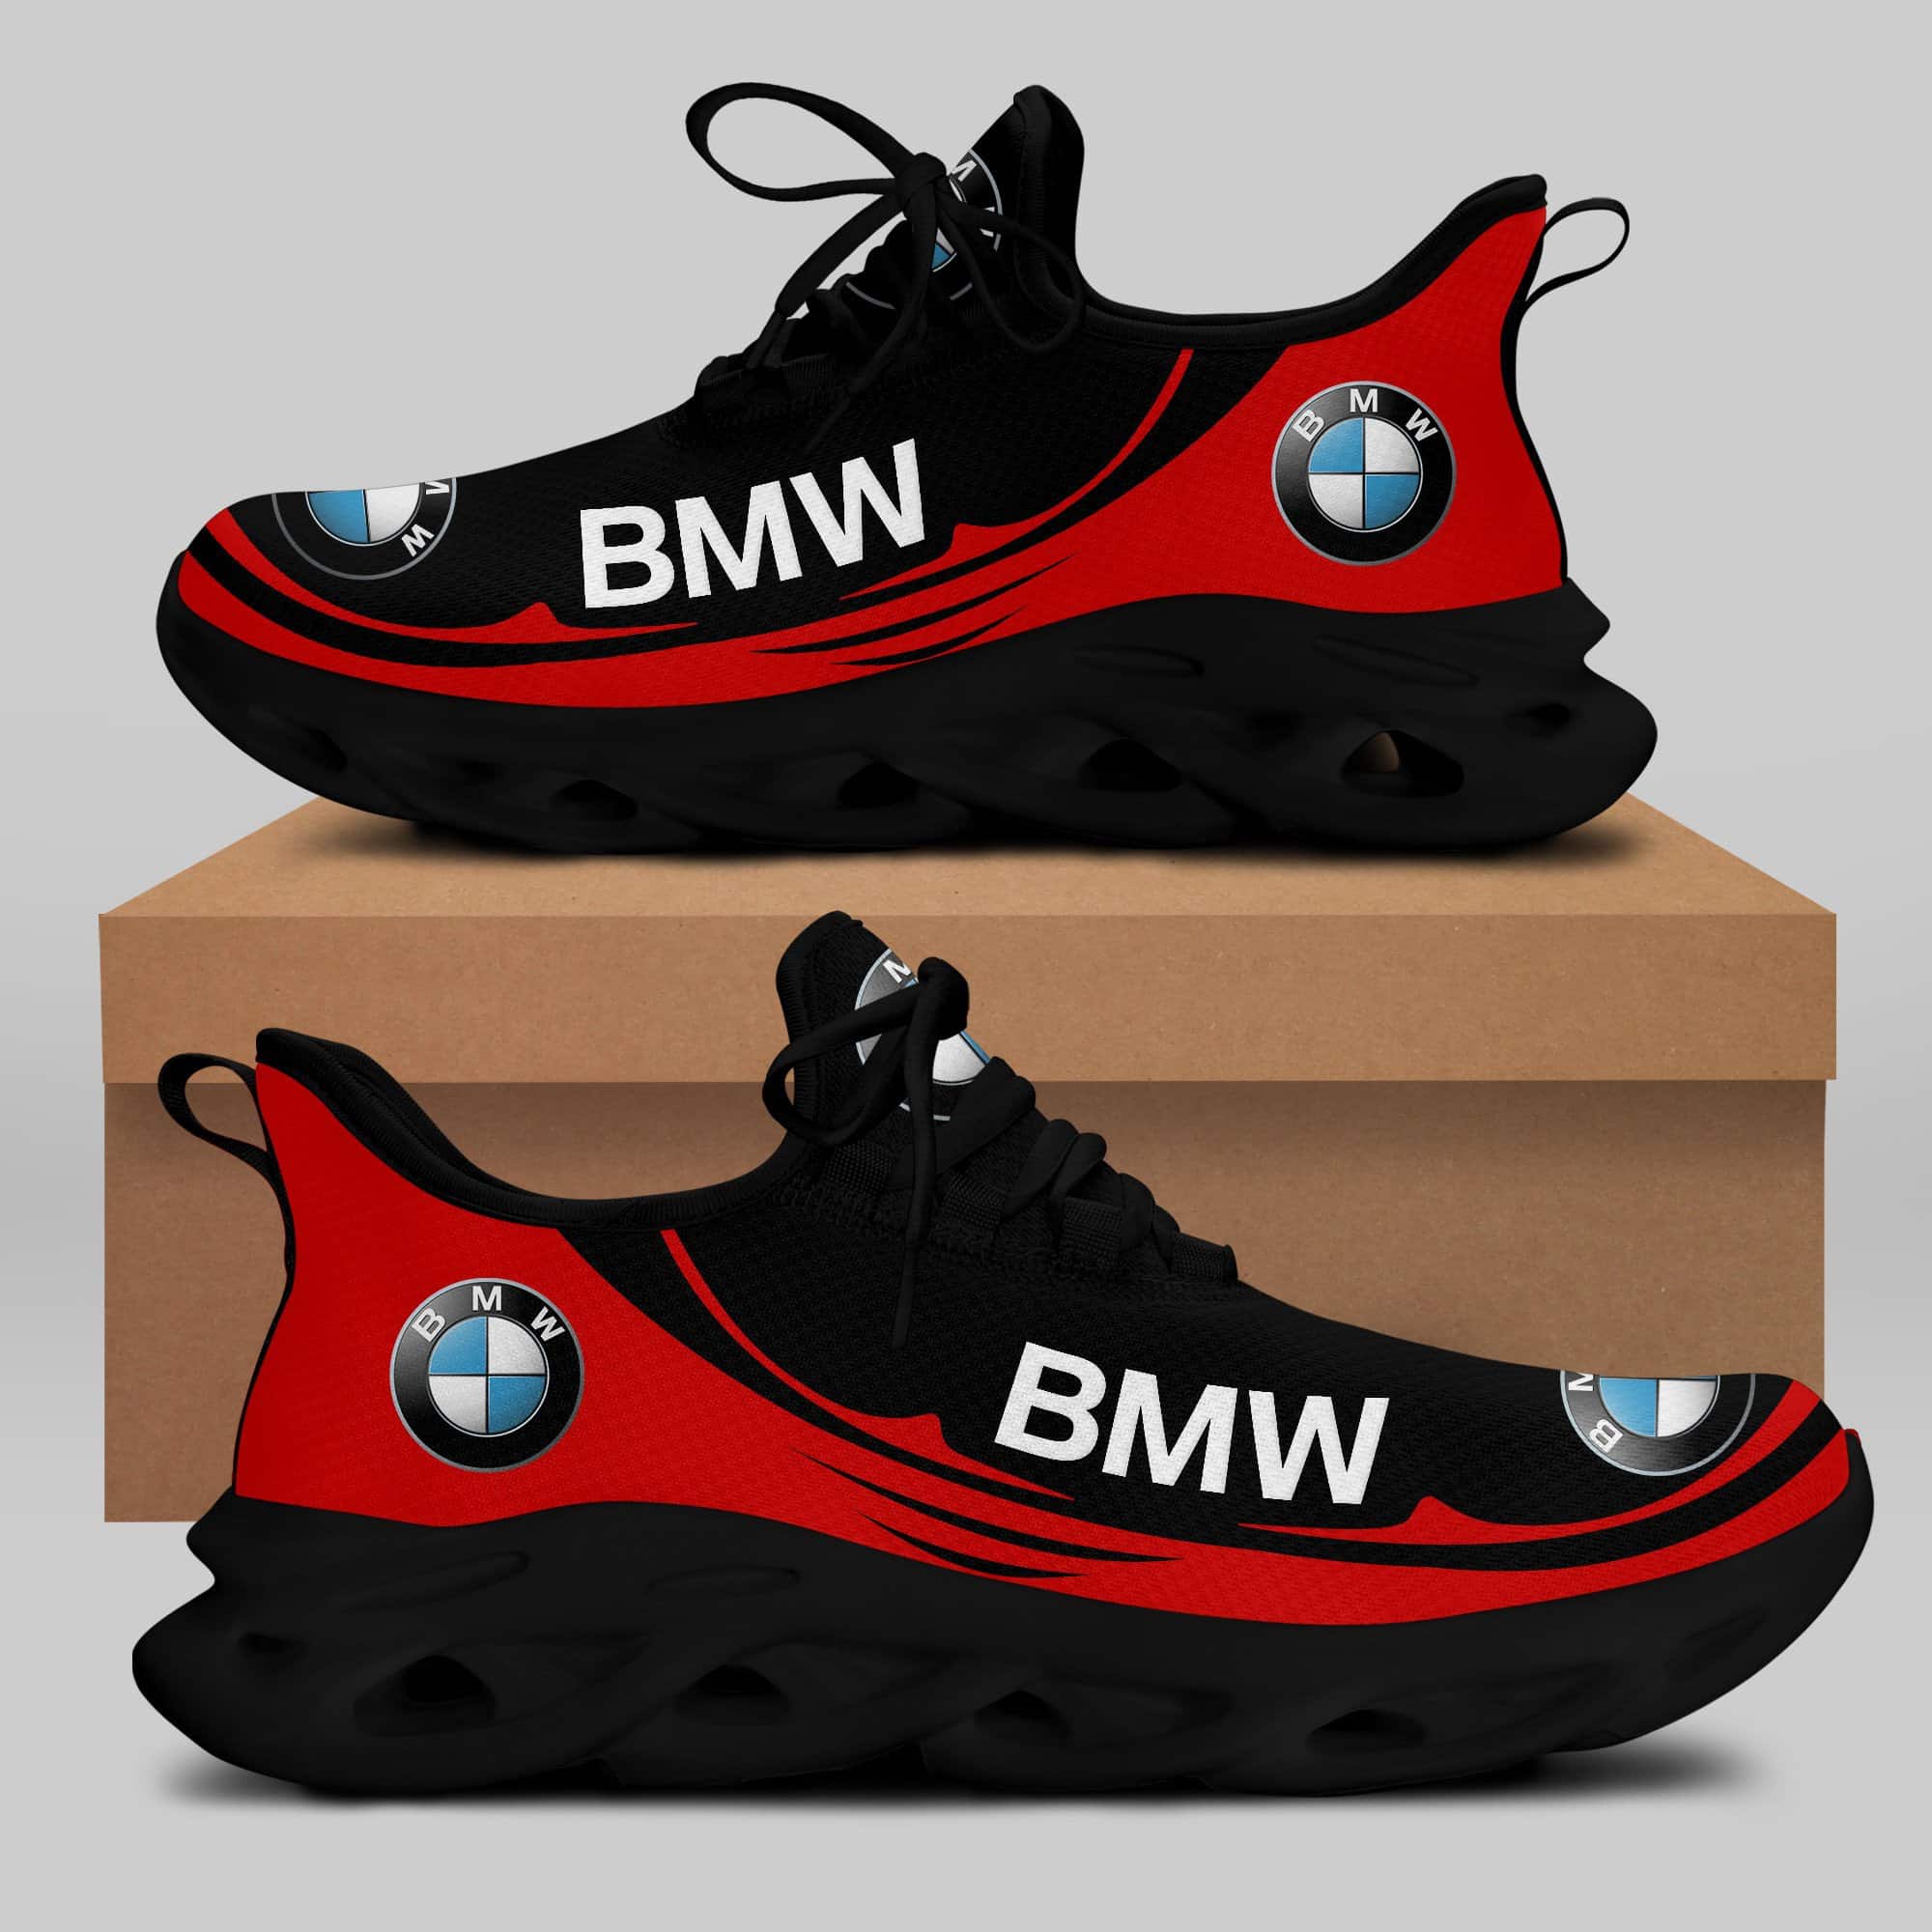 Bmw Running Shoes Max Soul Shoes Sneakers Ver 26 1